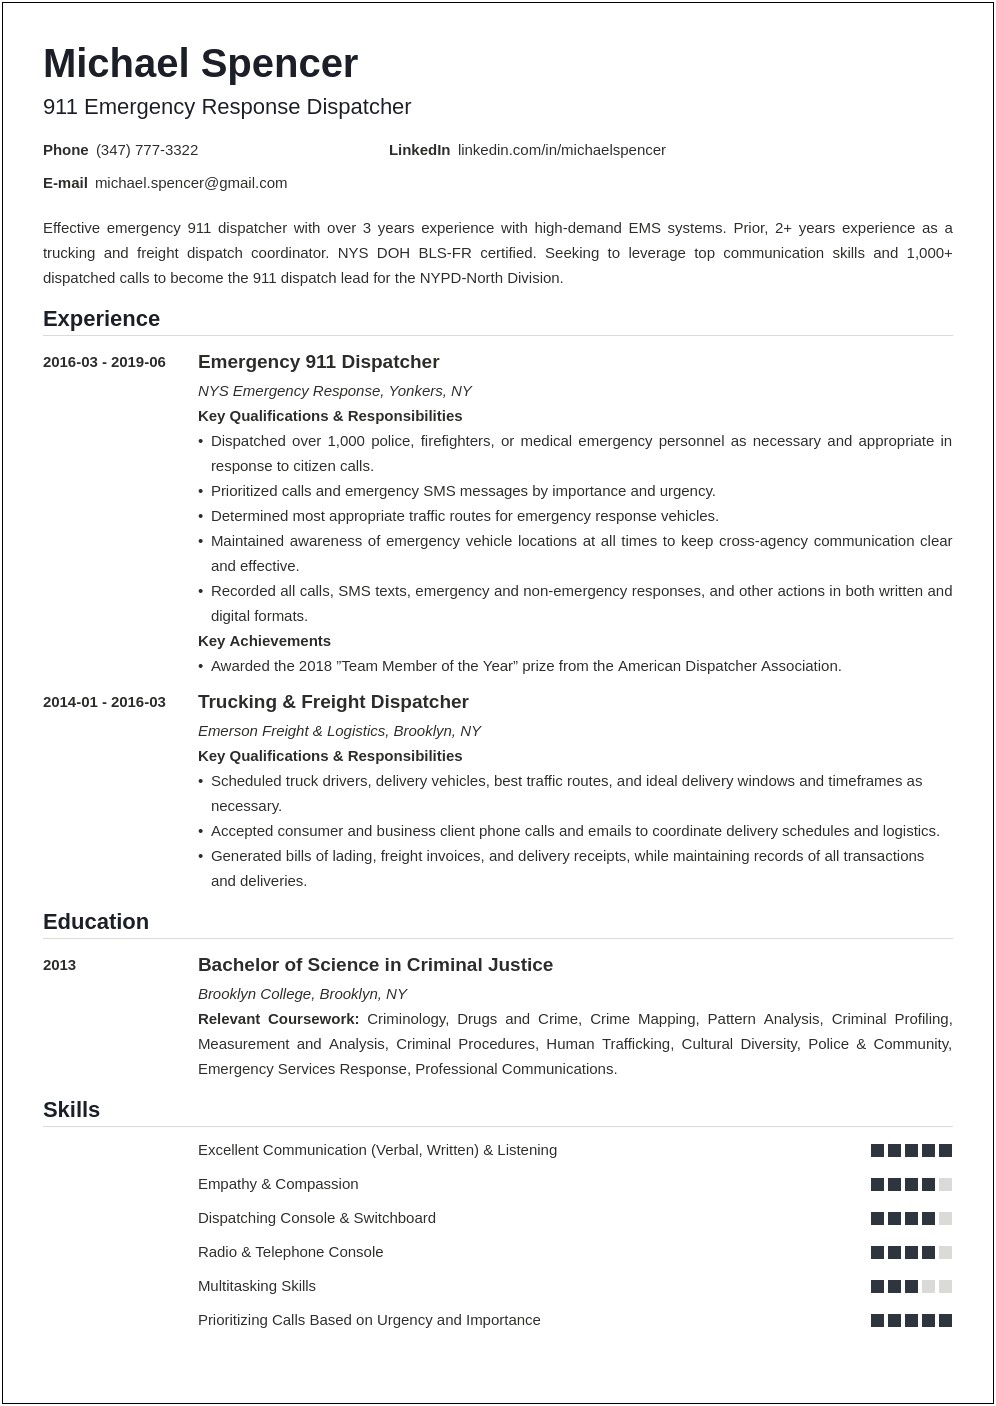 Resume Format For Dispatch Manager